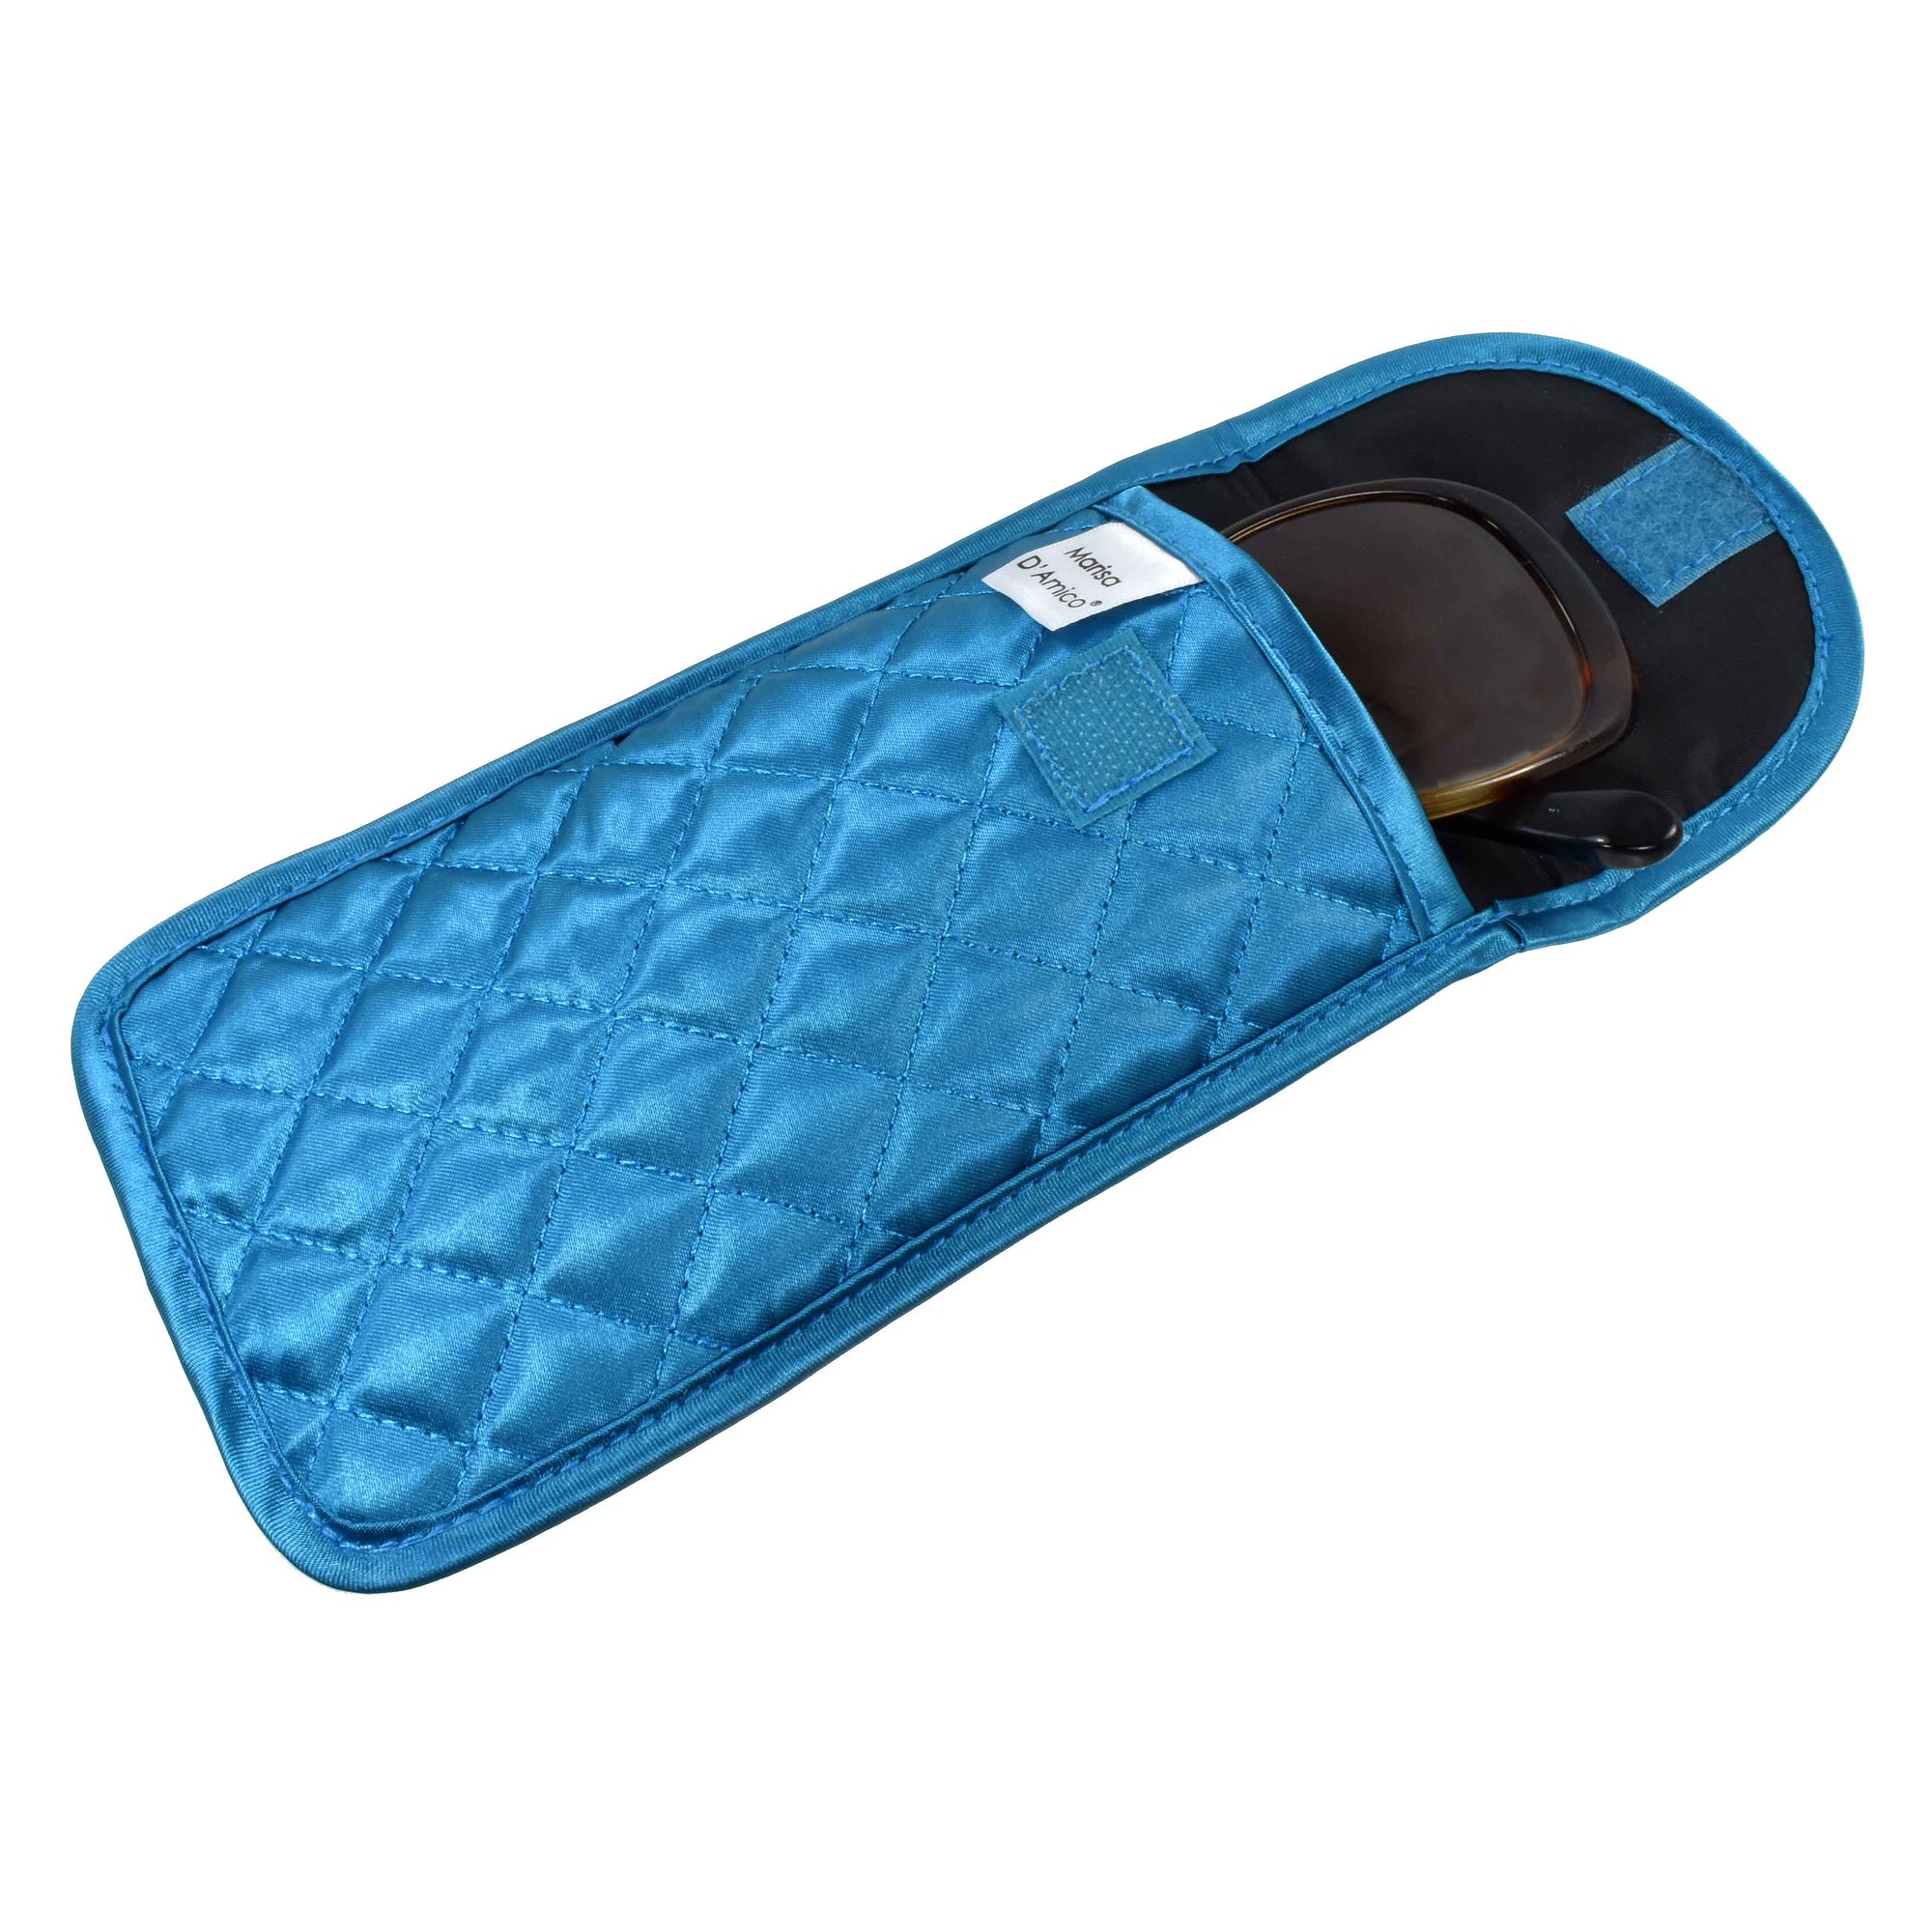 Quilted Satin Soft Eyeglass Pouch with Velcro Flap Closure in Teal, Open View